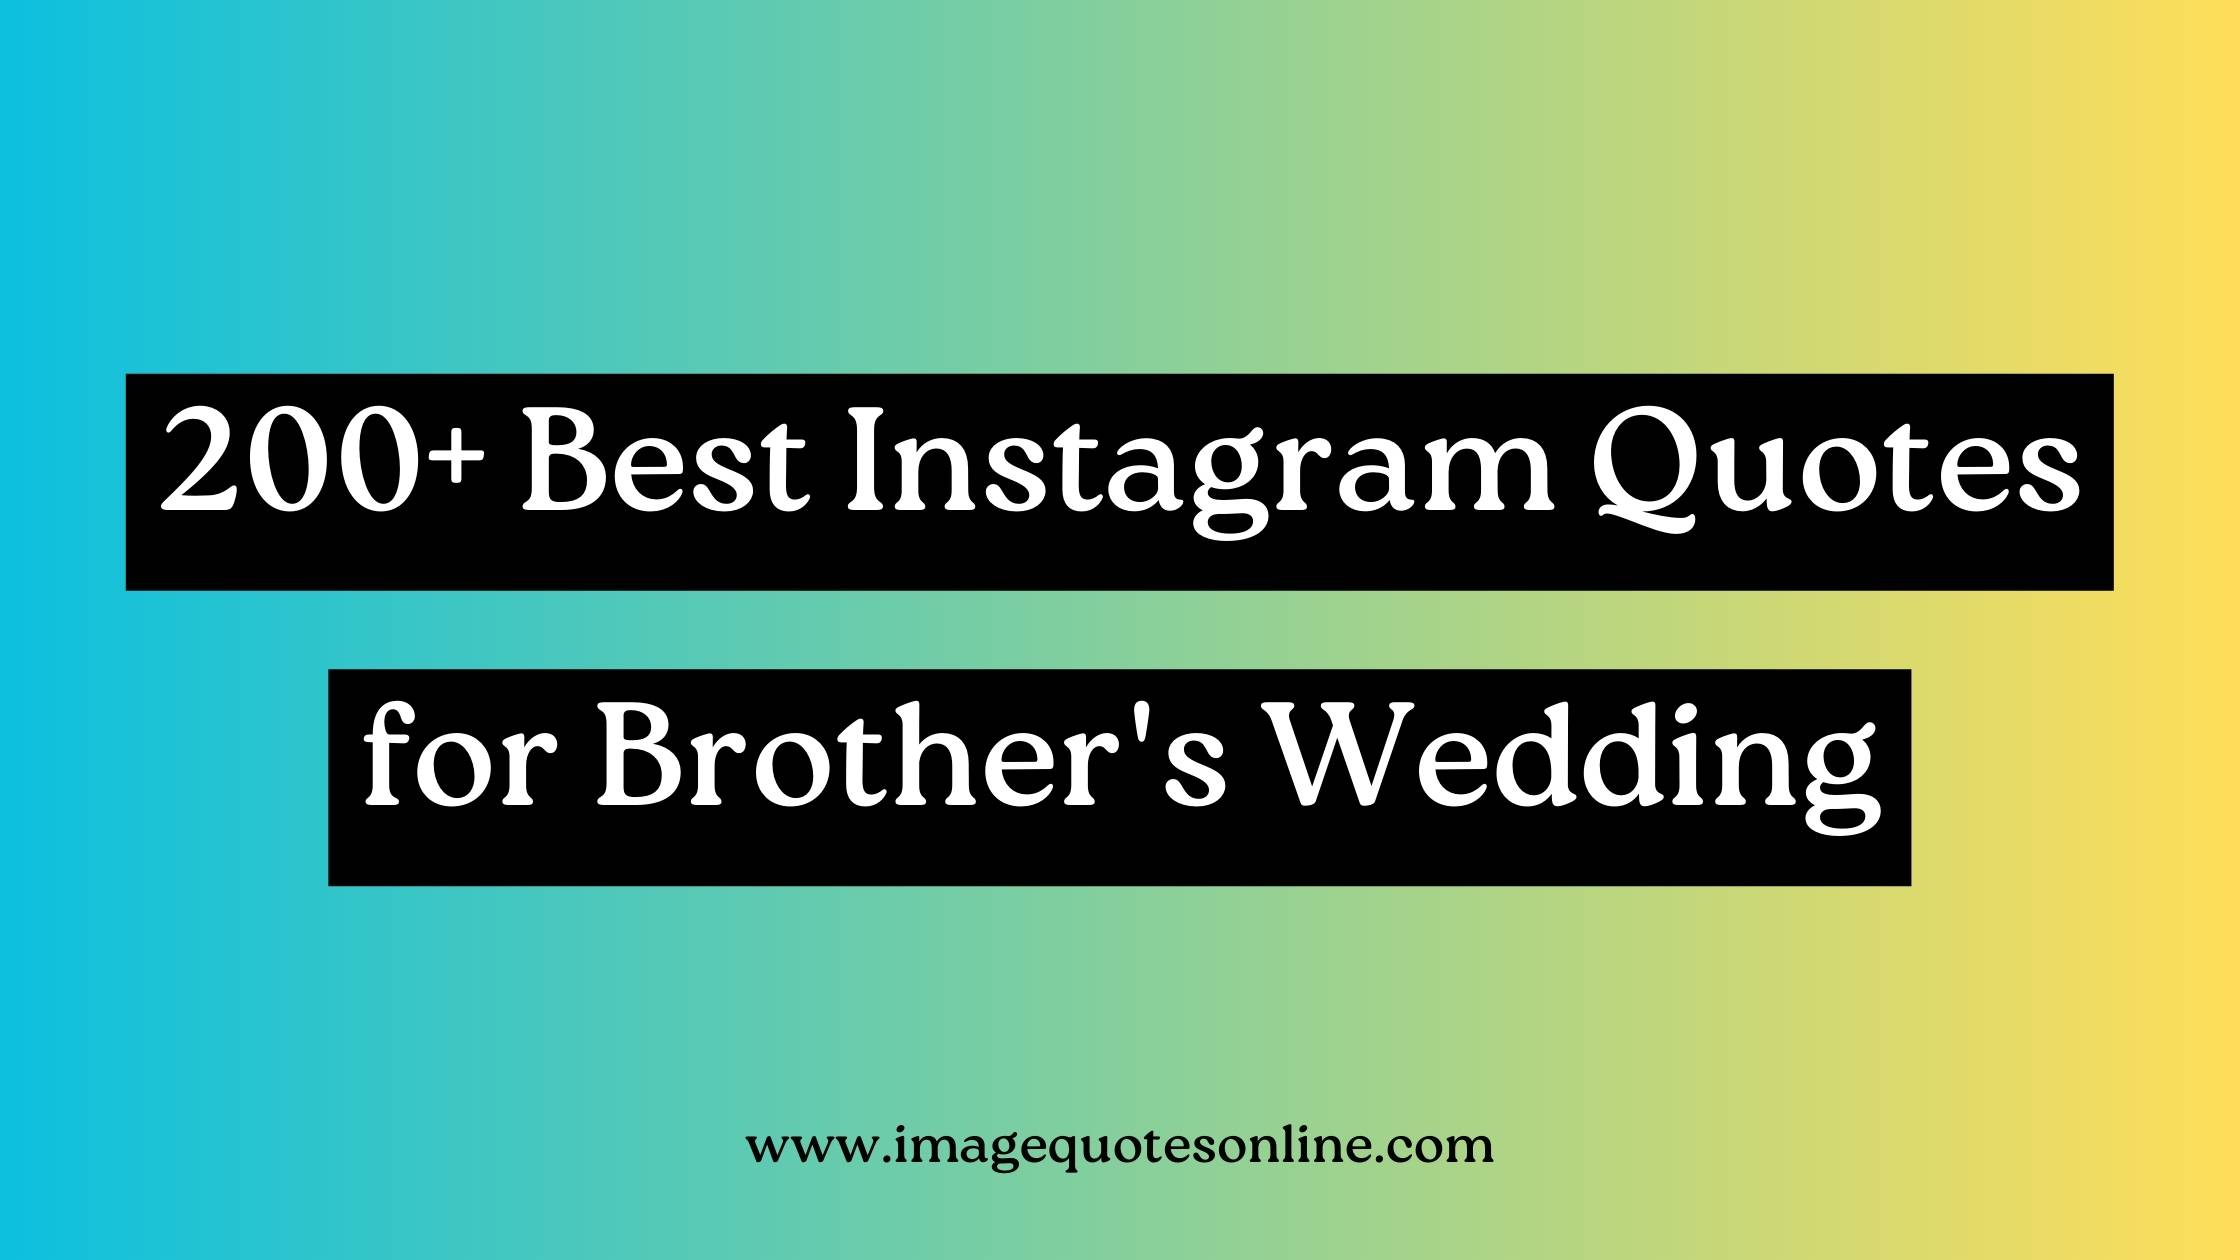 brother wedding quotes for Instagram